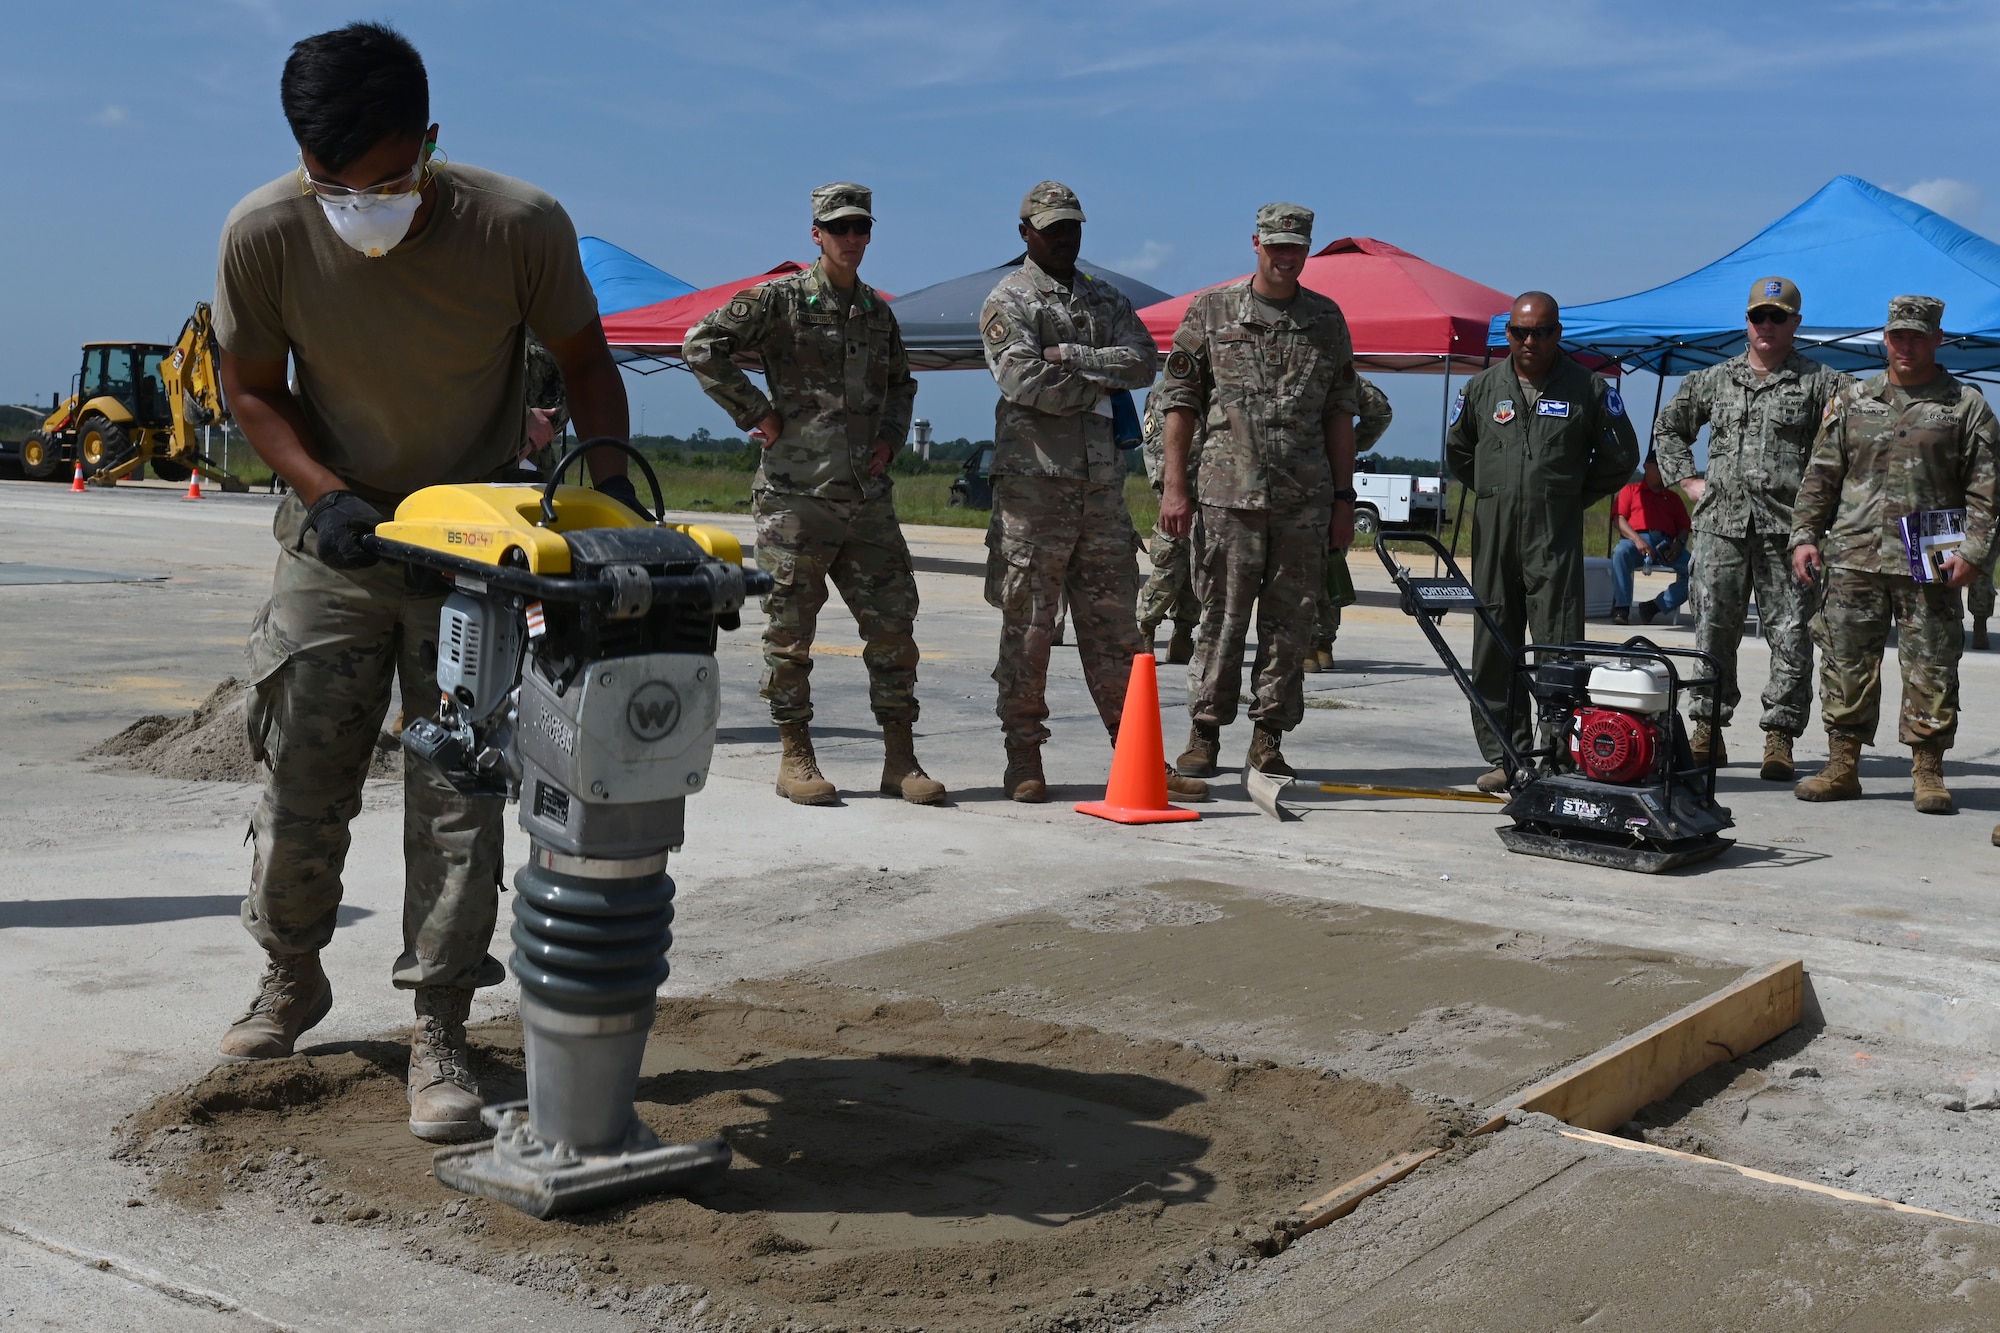 U.S. Air Force civil engineers from the pavements and construction equipment career field, from eight separate units, team up with U.S. Navy Seabees from the Naval Mobile Construction Battalion 133, Gulfport, Mississippi for an Expedient and Expeditionary Airfield Damage Repair (E-ADR) distinguished visitors’ demonstration at McEntire Joint National Guard Base, South Carolina, Aug. 31, 2021. The purpose of the training is to provide just enough, just in time repair capability with minimal cost and materials in a wartime situation.  (U.S. Air National Guard photo by Senior Master Sgt. Edward Snyder, 169th Fighter Wing Public Affairs)